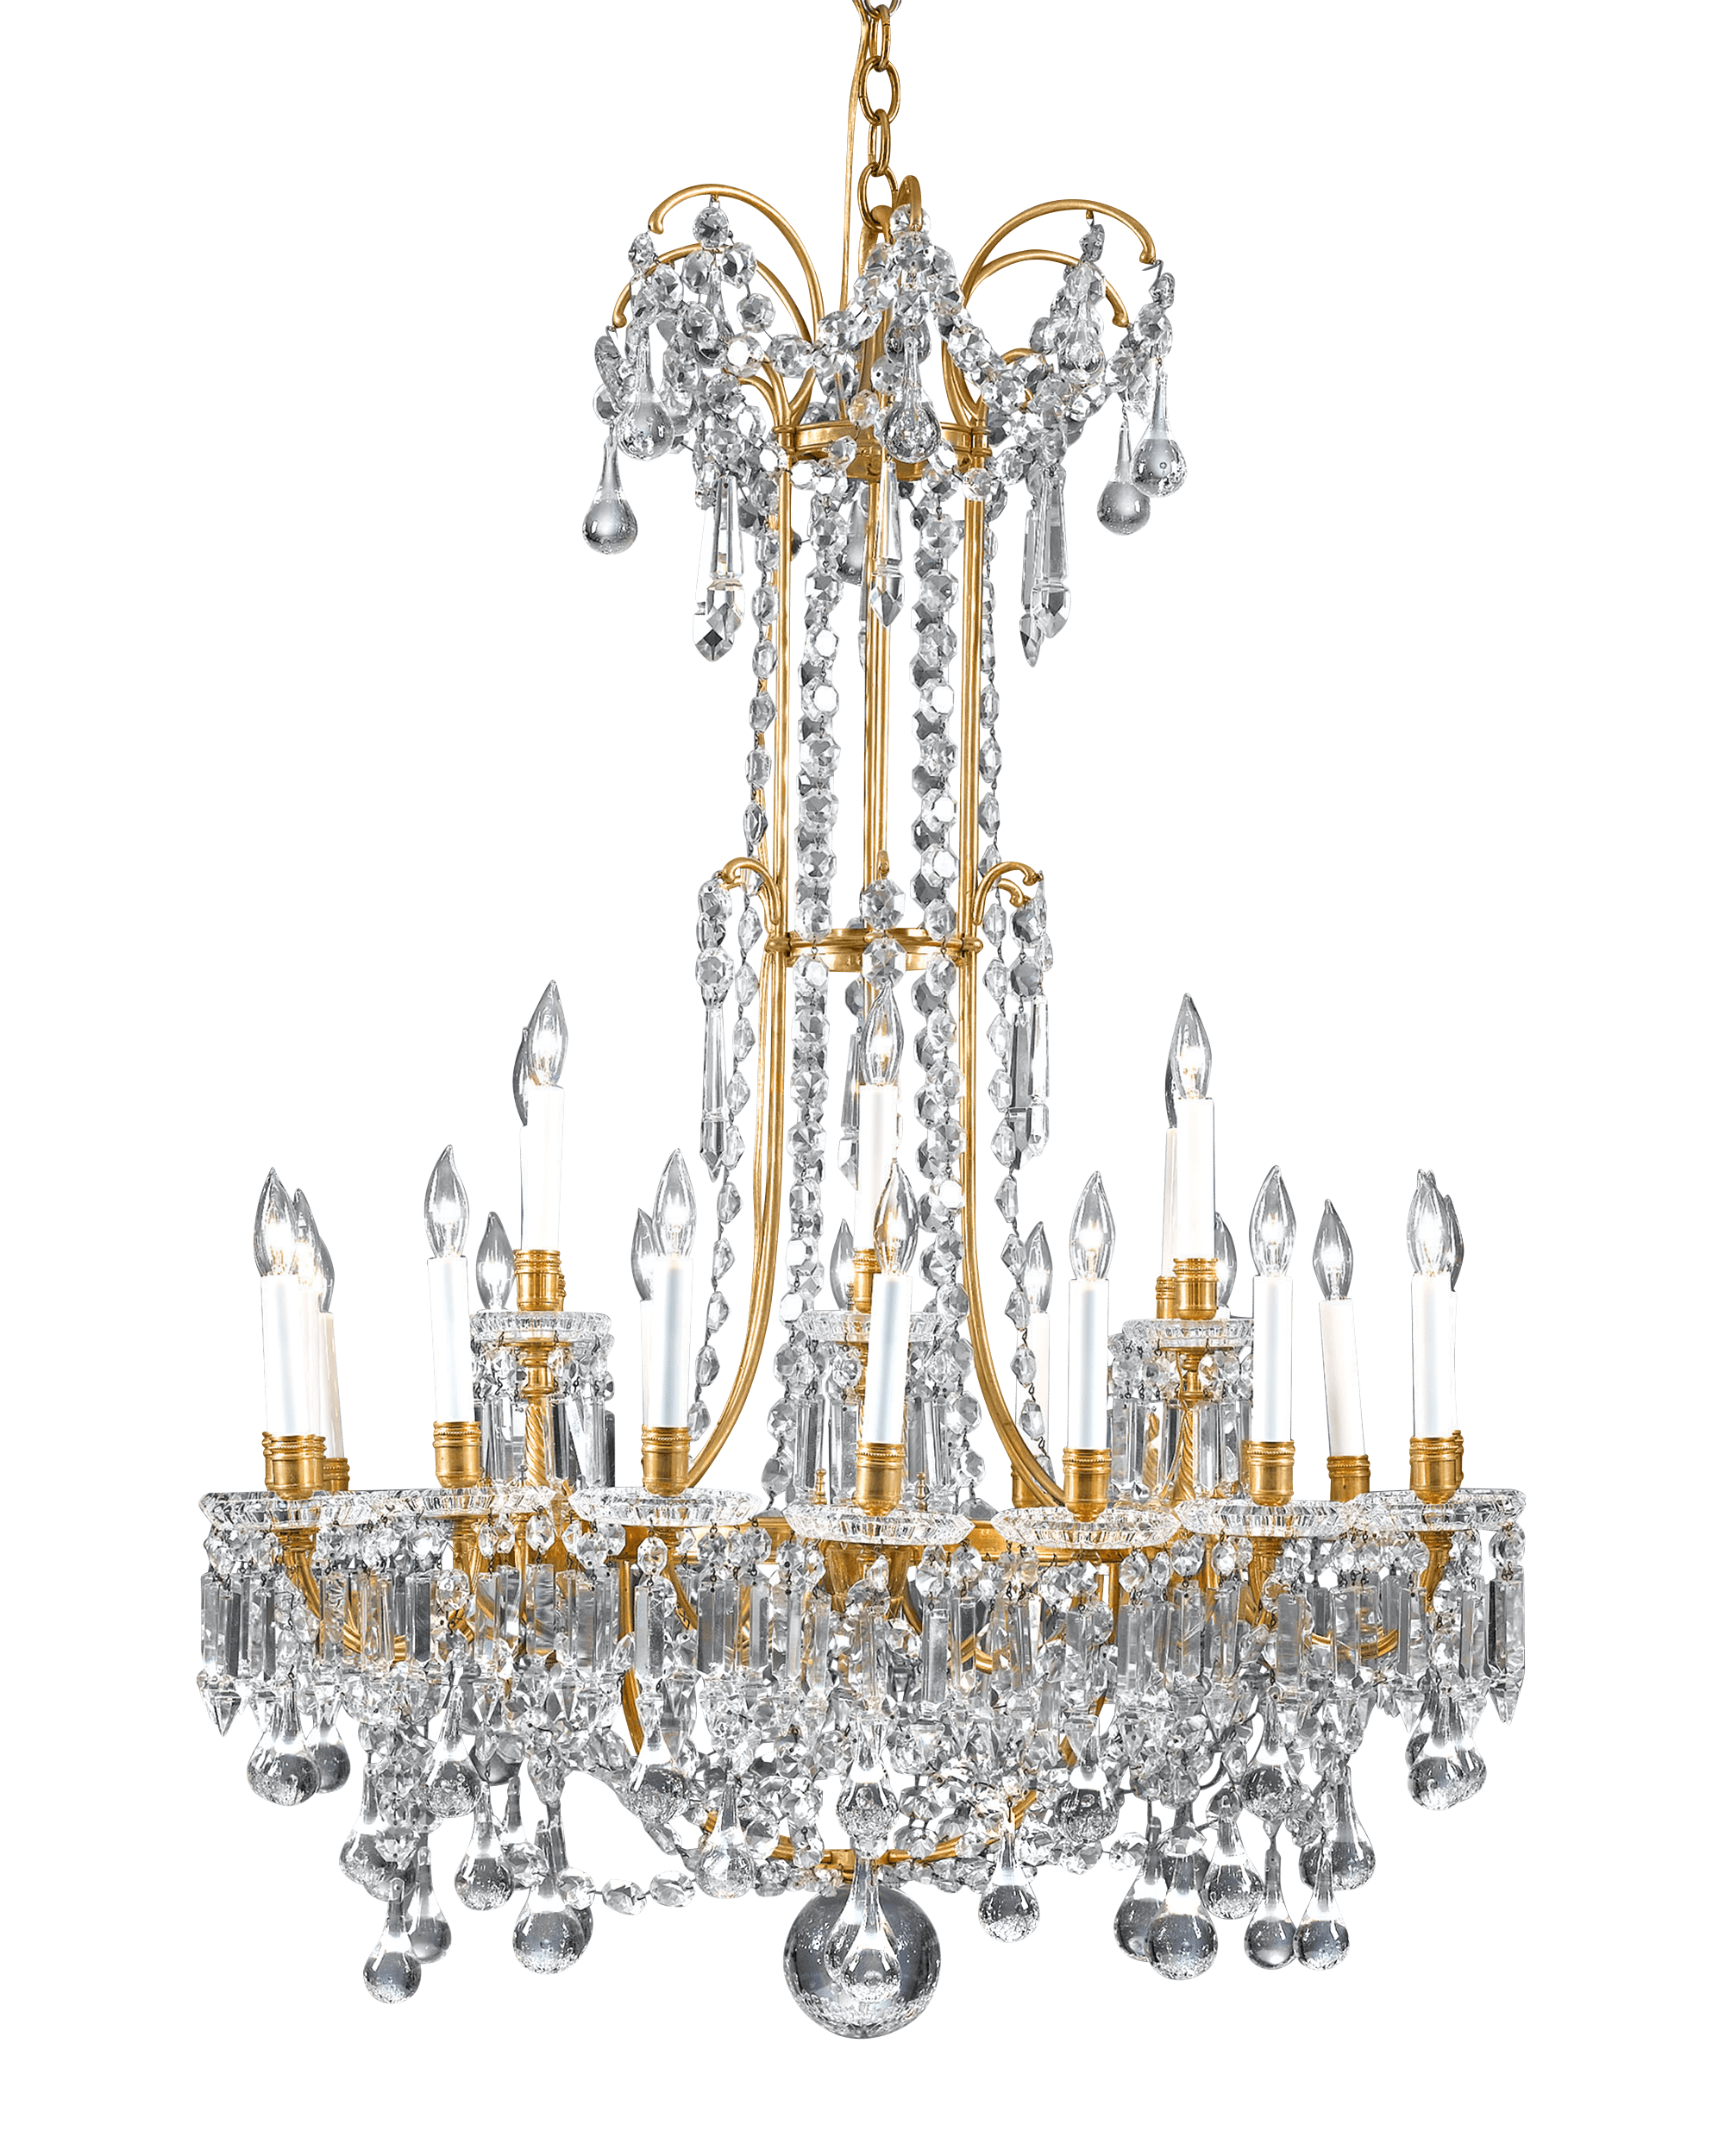 A grand 24-light crystal chandelier by the legendary firm of Baccarat